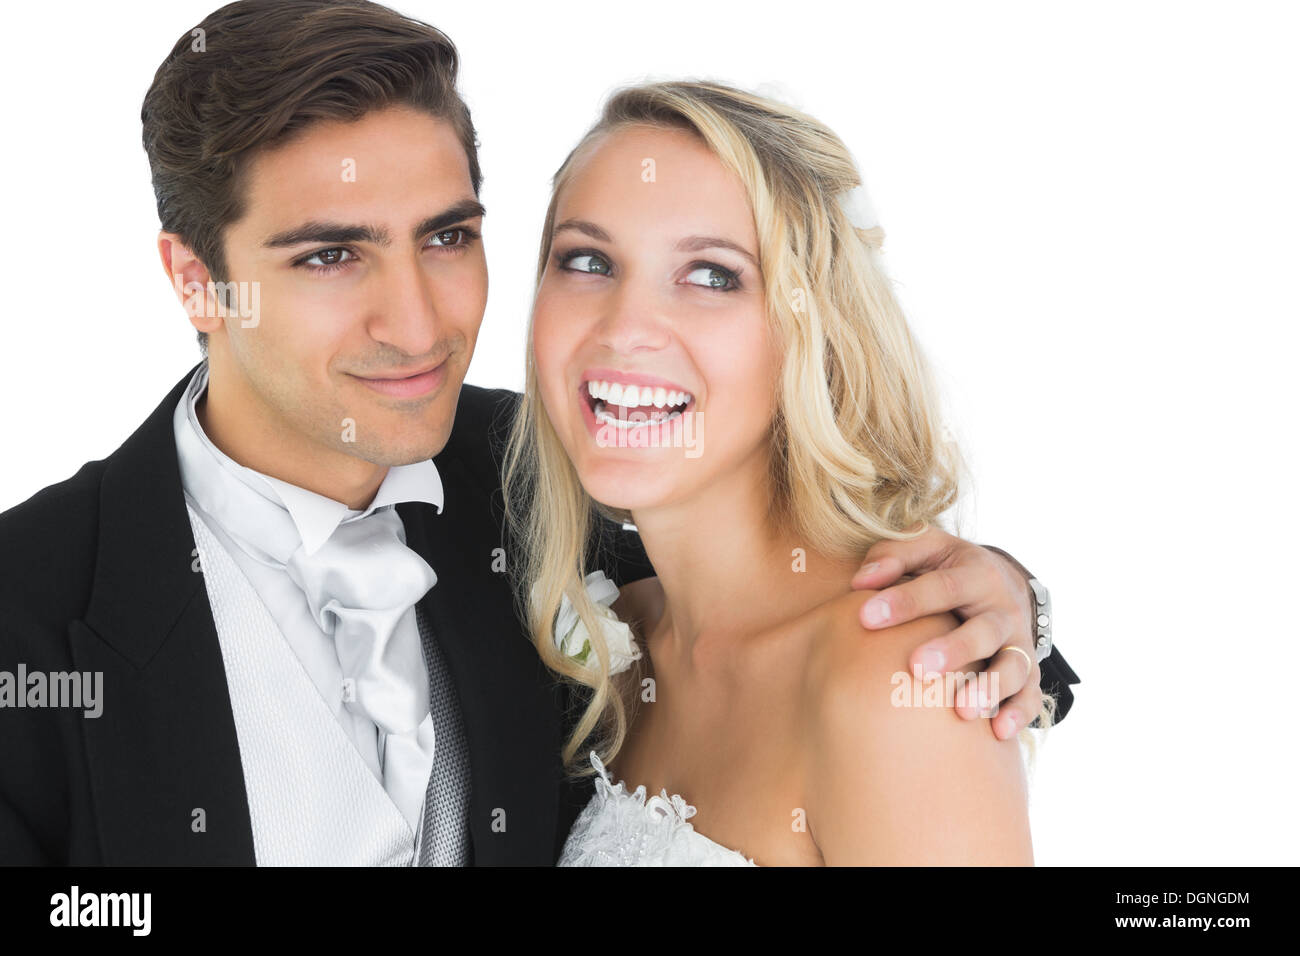 Smiling handsome bridegroom posing with his wife Stock Photo